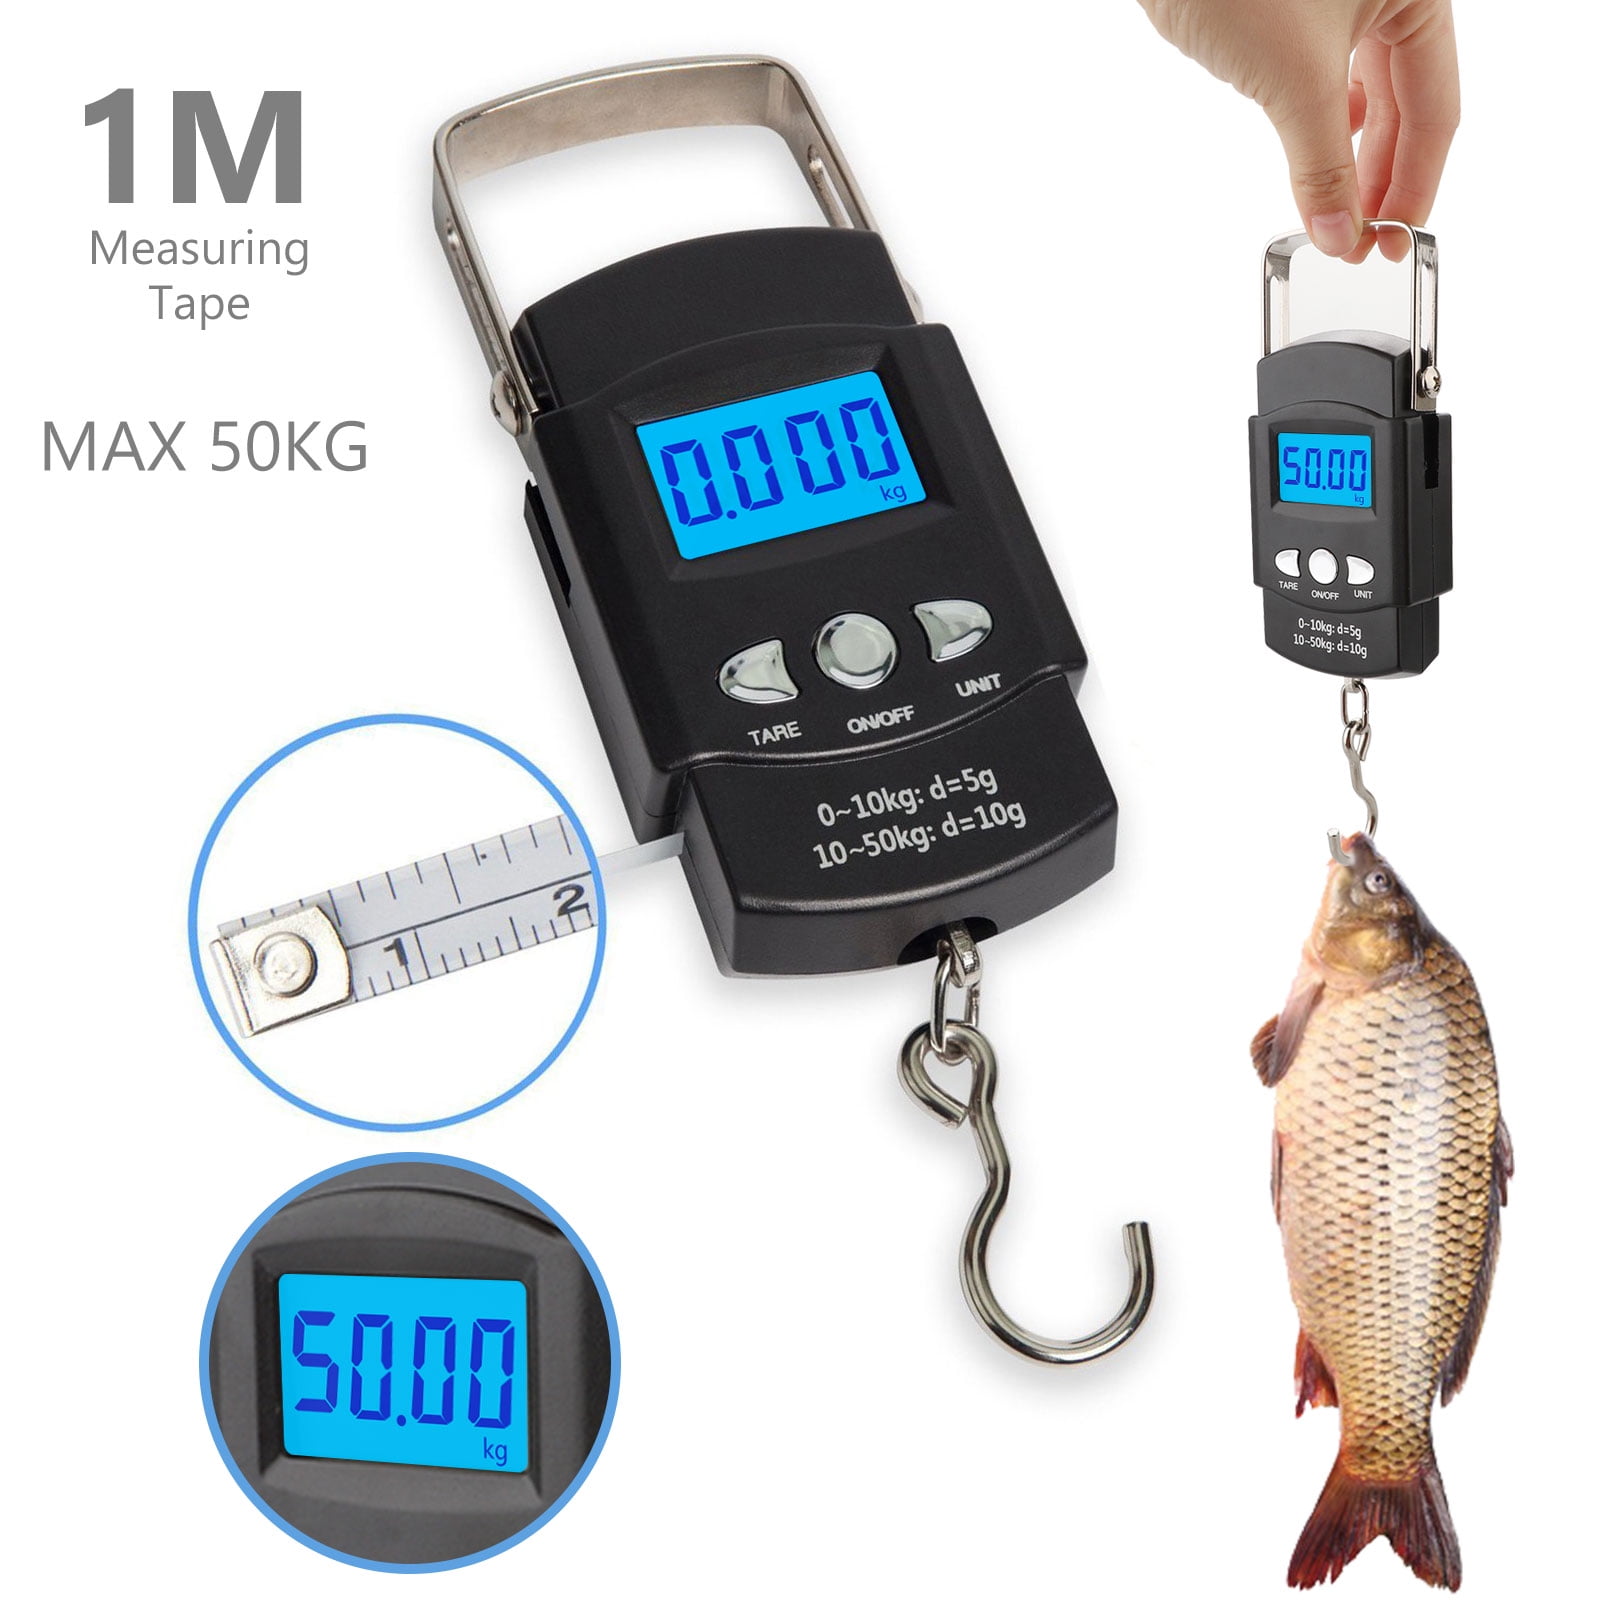 Grocery Handheld Portable Digital Scale For Luggage Travel Flee Market etc. 